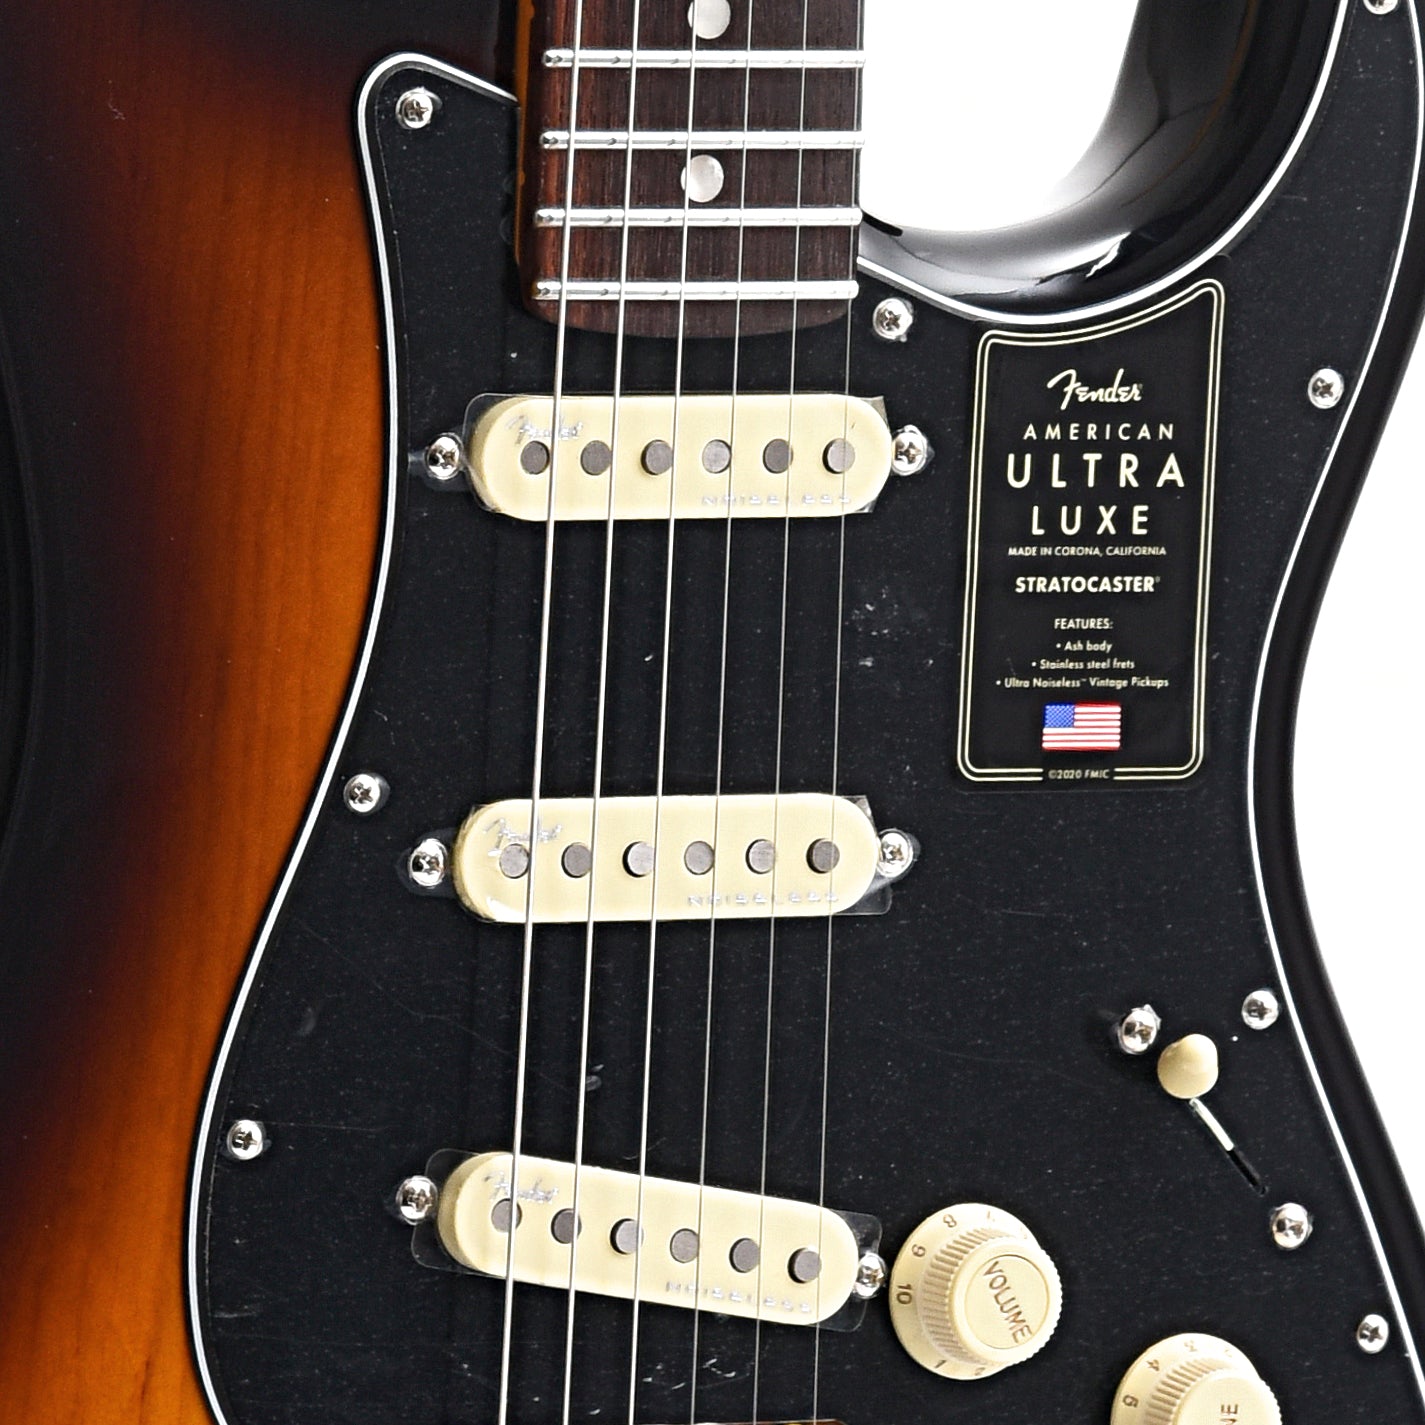 Pickups of Fender American Ultra Luxe Stratocaster